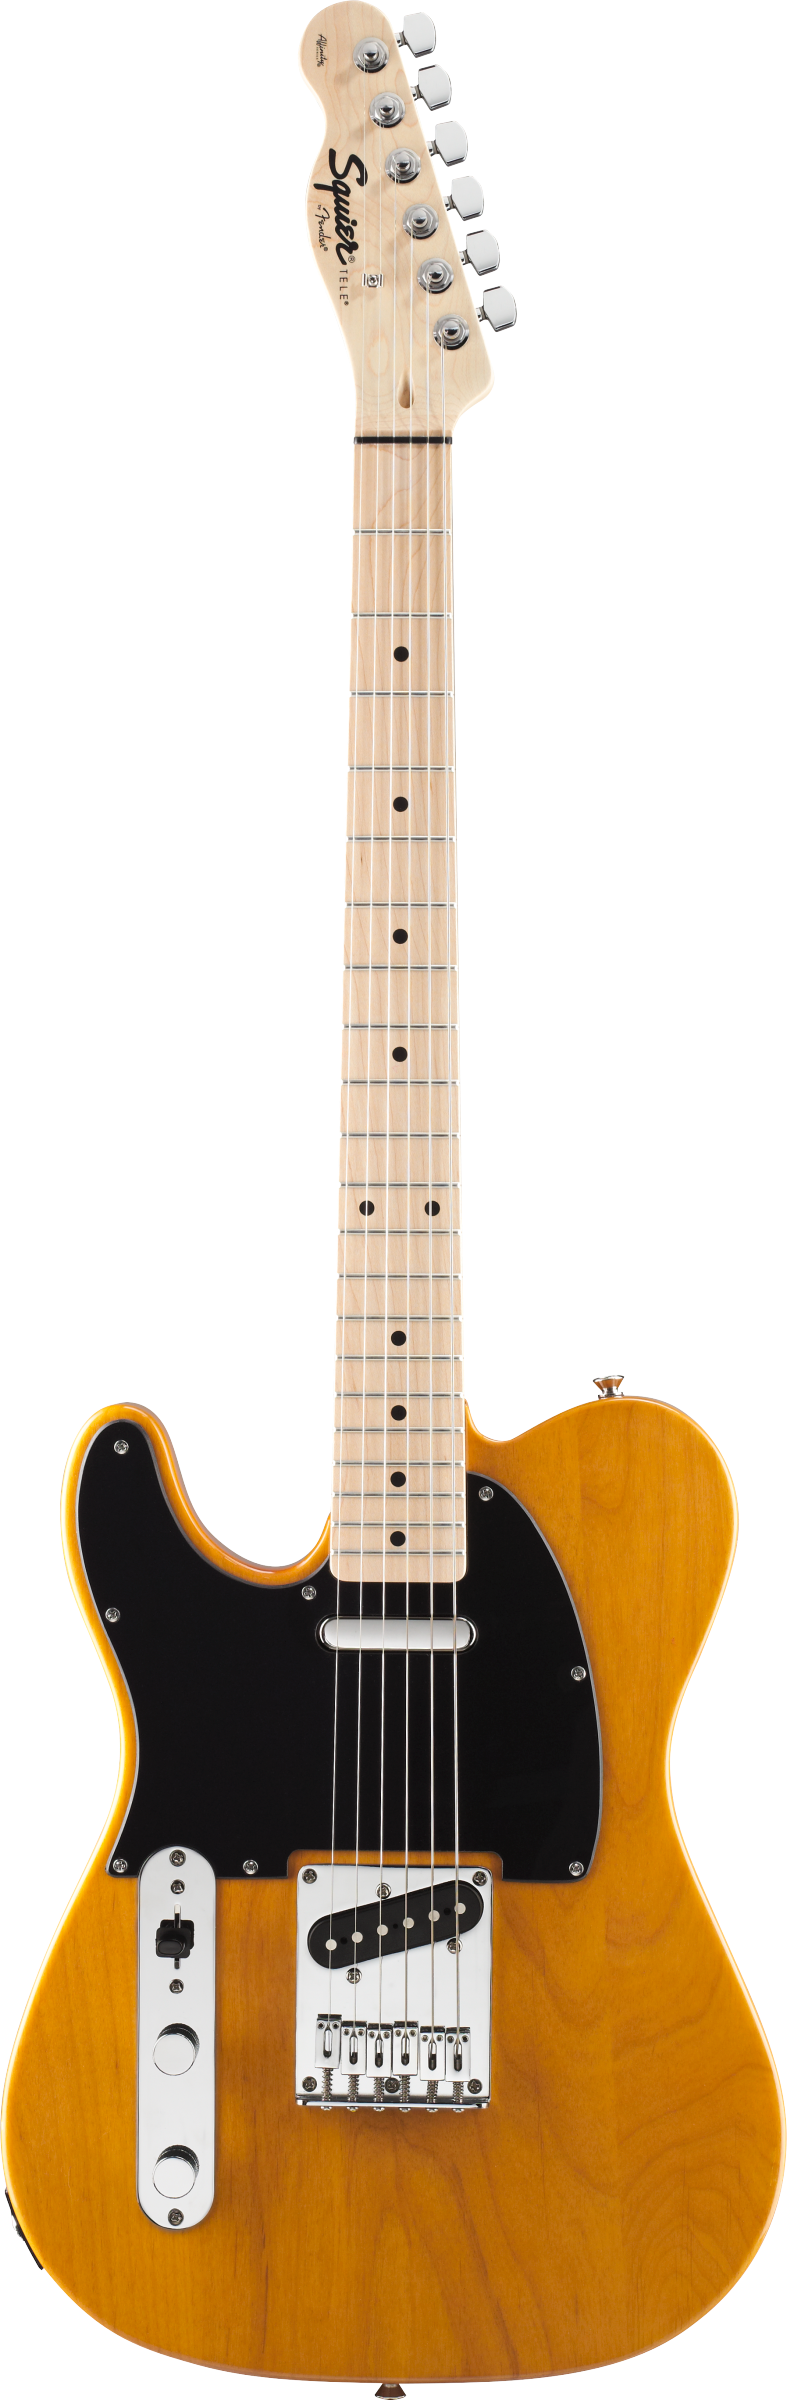 Squier Affinity Series Telecaster Lefthanded Maple Fingerboard Butterscotch Blonde-Buzz Music